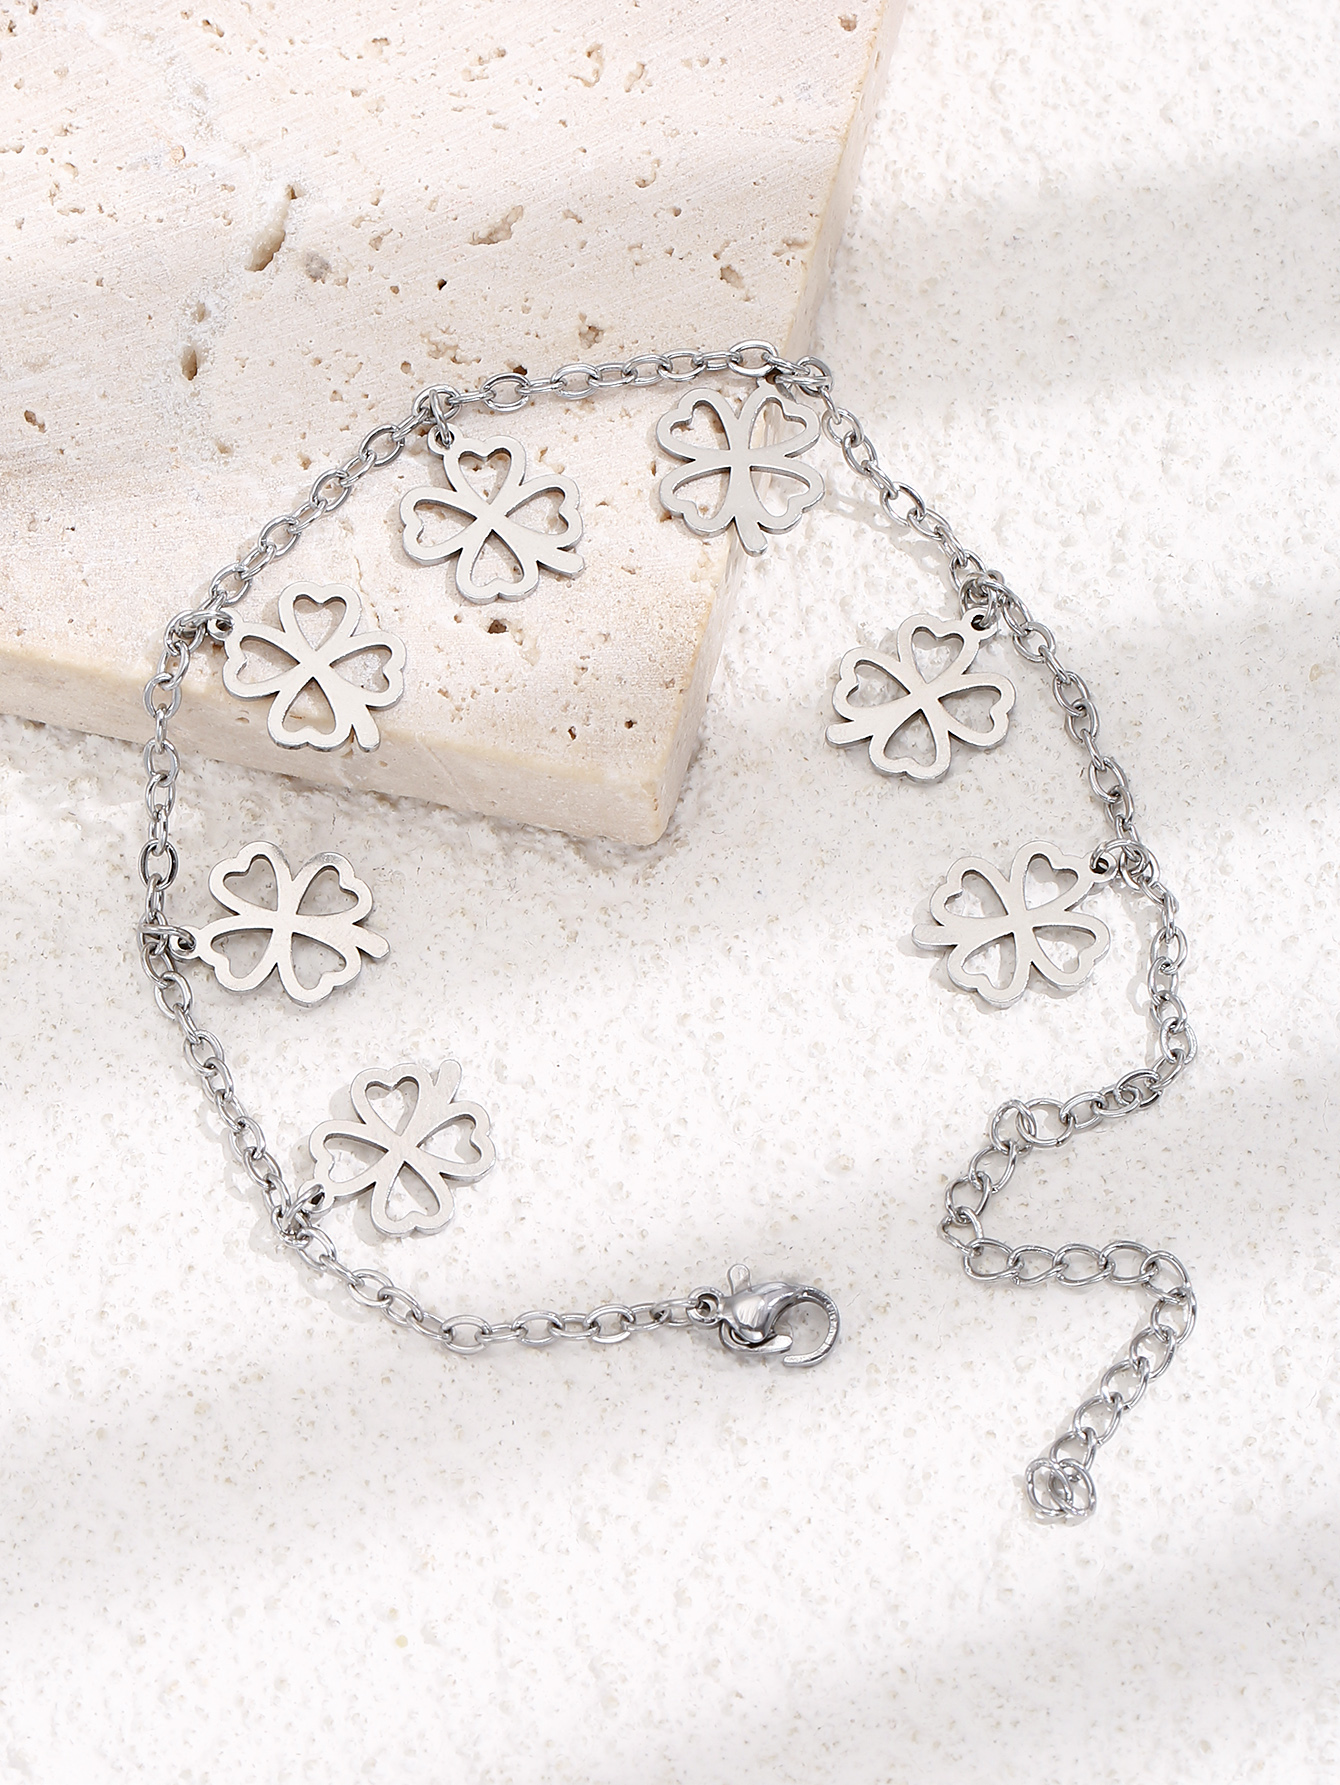 10 pcs - Silver Chain Anklet/Bracelet with Four-leaf Clover Charms|GCJA003-Silver|UK SELLER